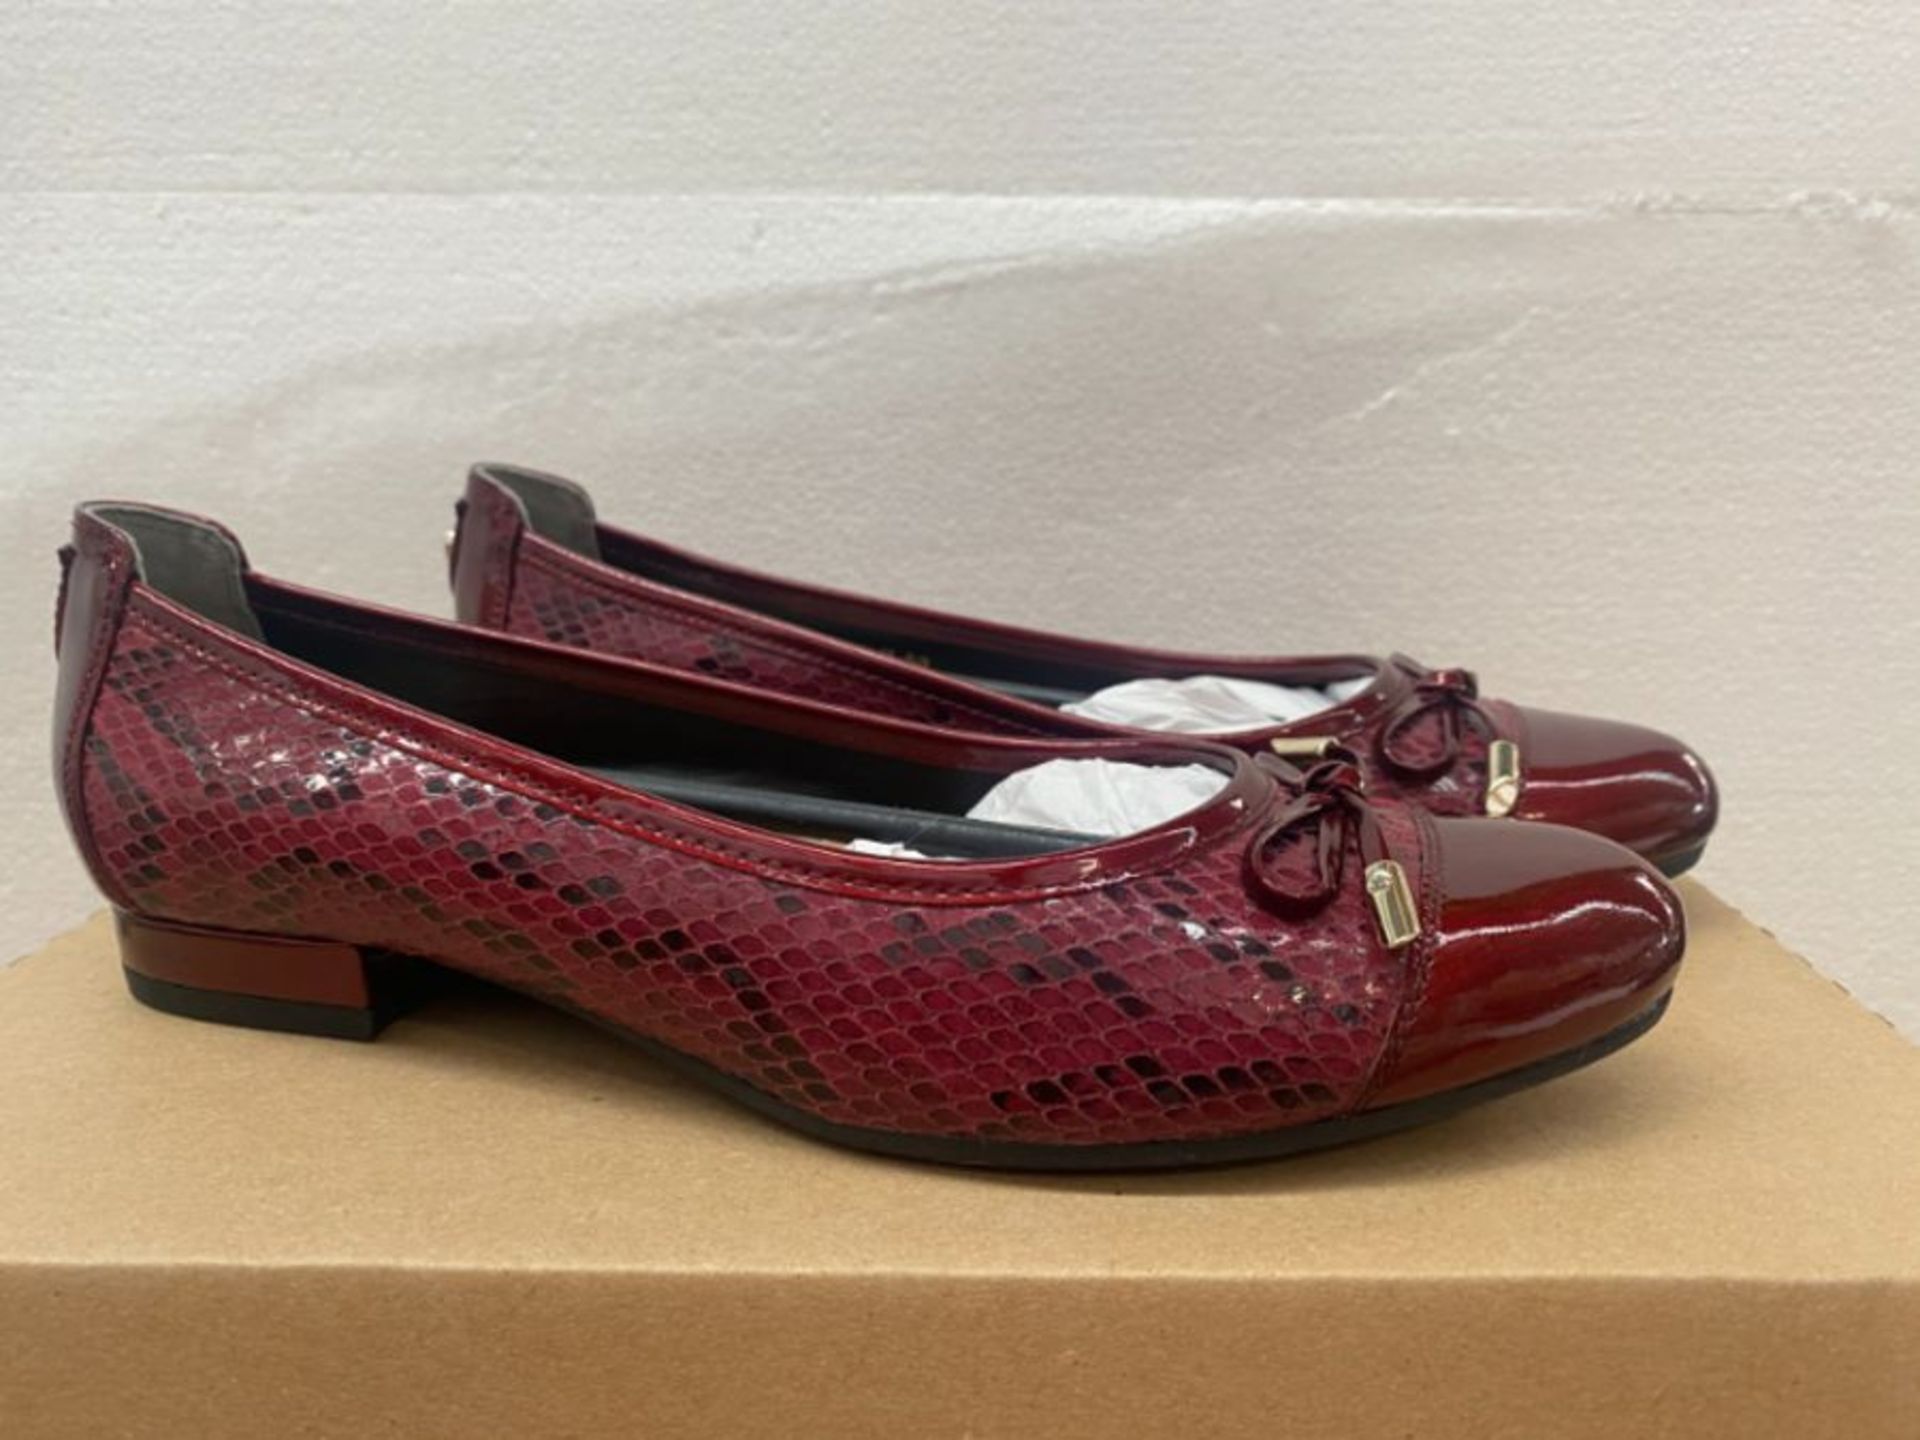 1 LOT TO CONTAIN AN AS NEW BOXED PAIR OF VAN DUL UK SIZE 5 SLIP ON SHOE IN MULBERRY